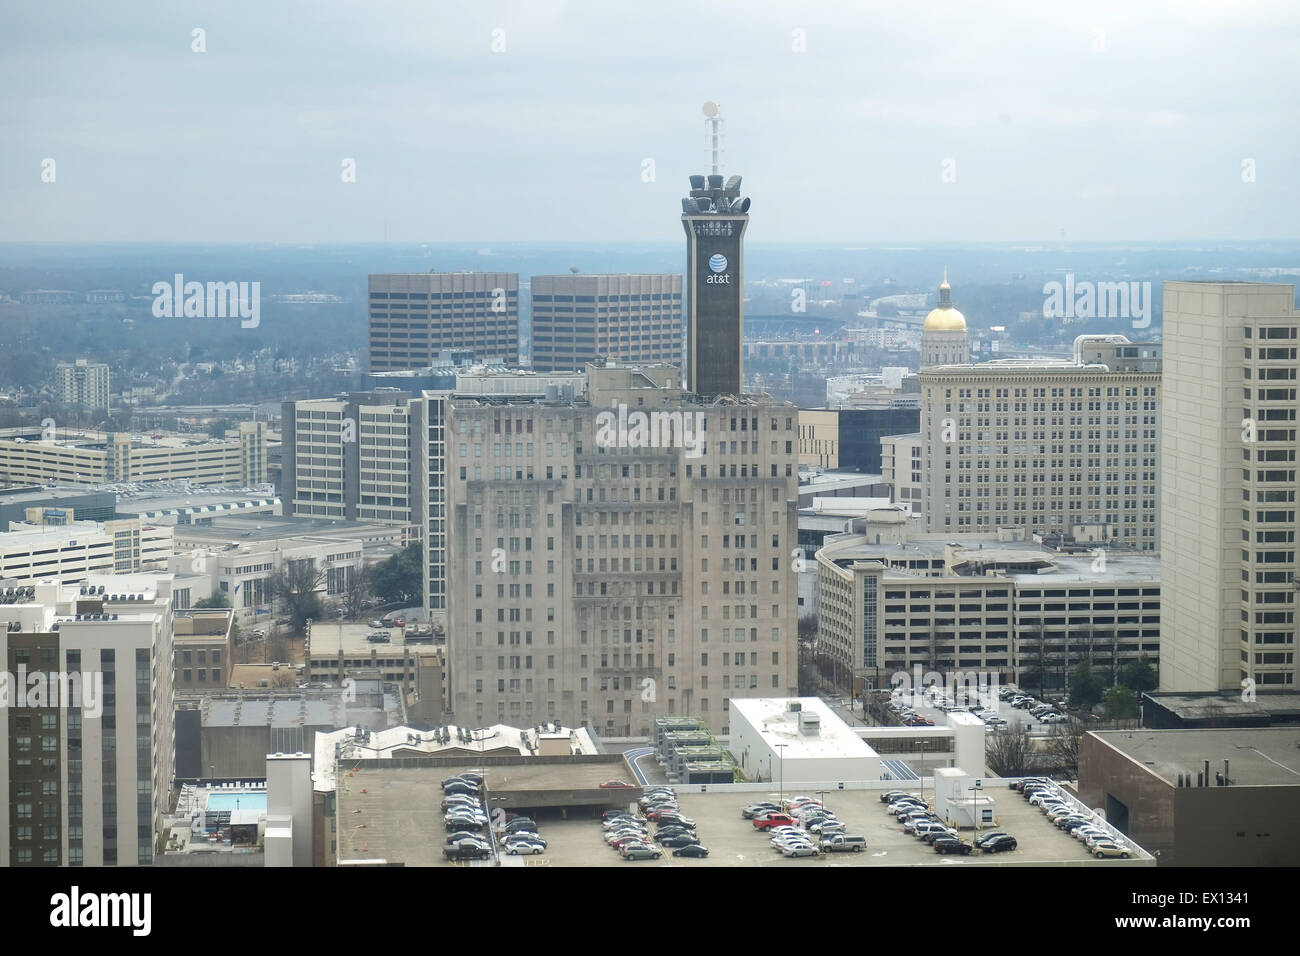 Atlanta Georgia- January 29, 2015 :  View of part of the city of Atlanta showing the AT&T Tower and State Capitol,  January 29, Stock Photo